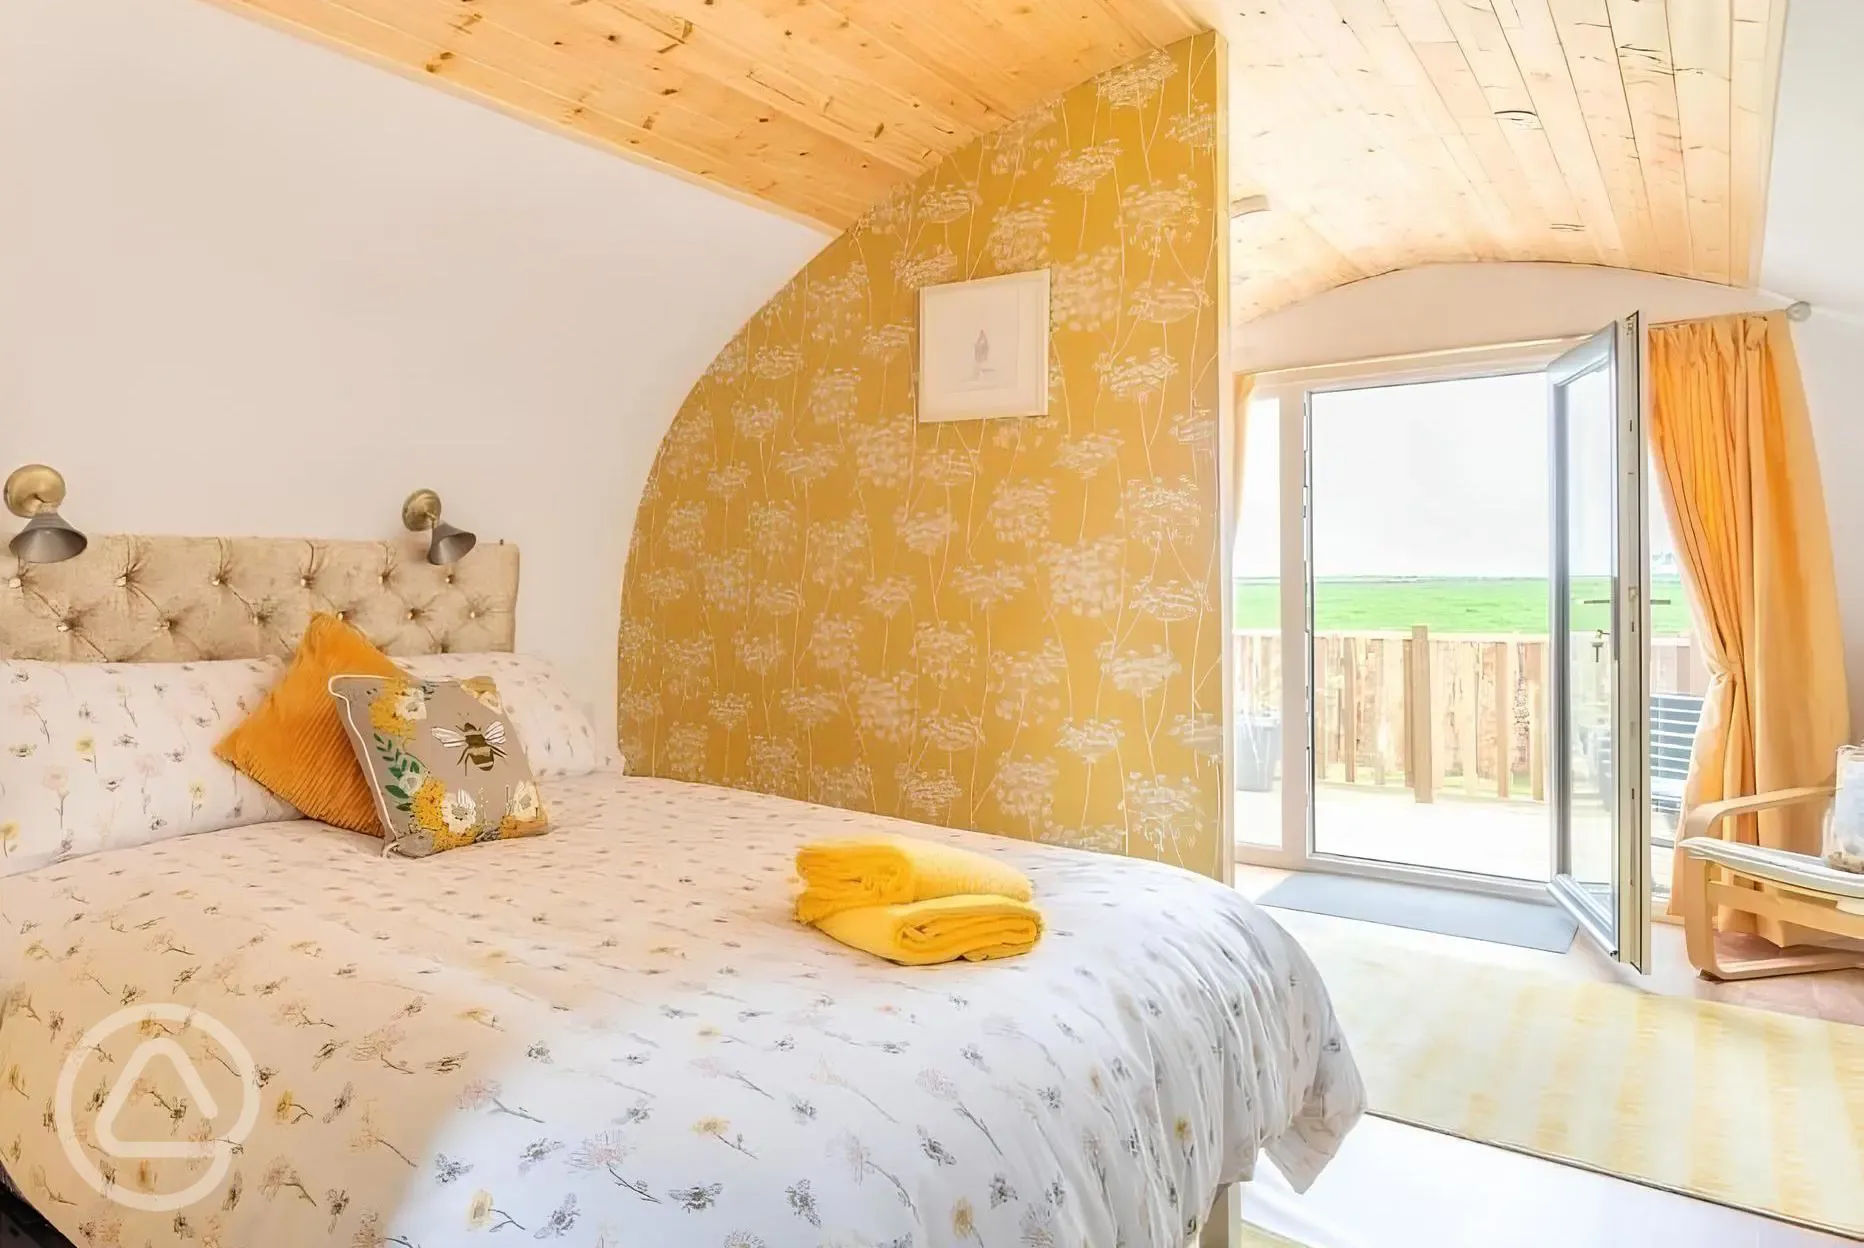 The Bee Hive double bed